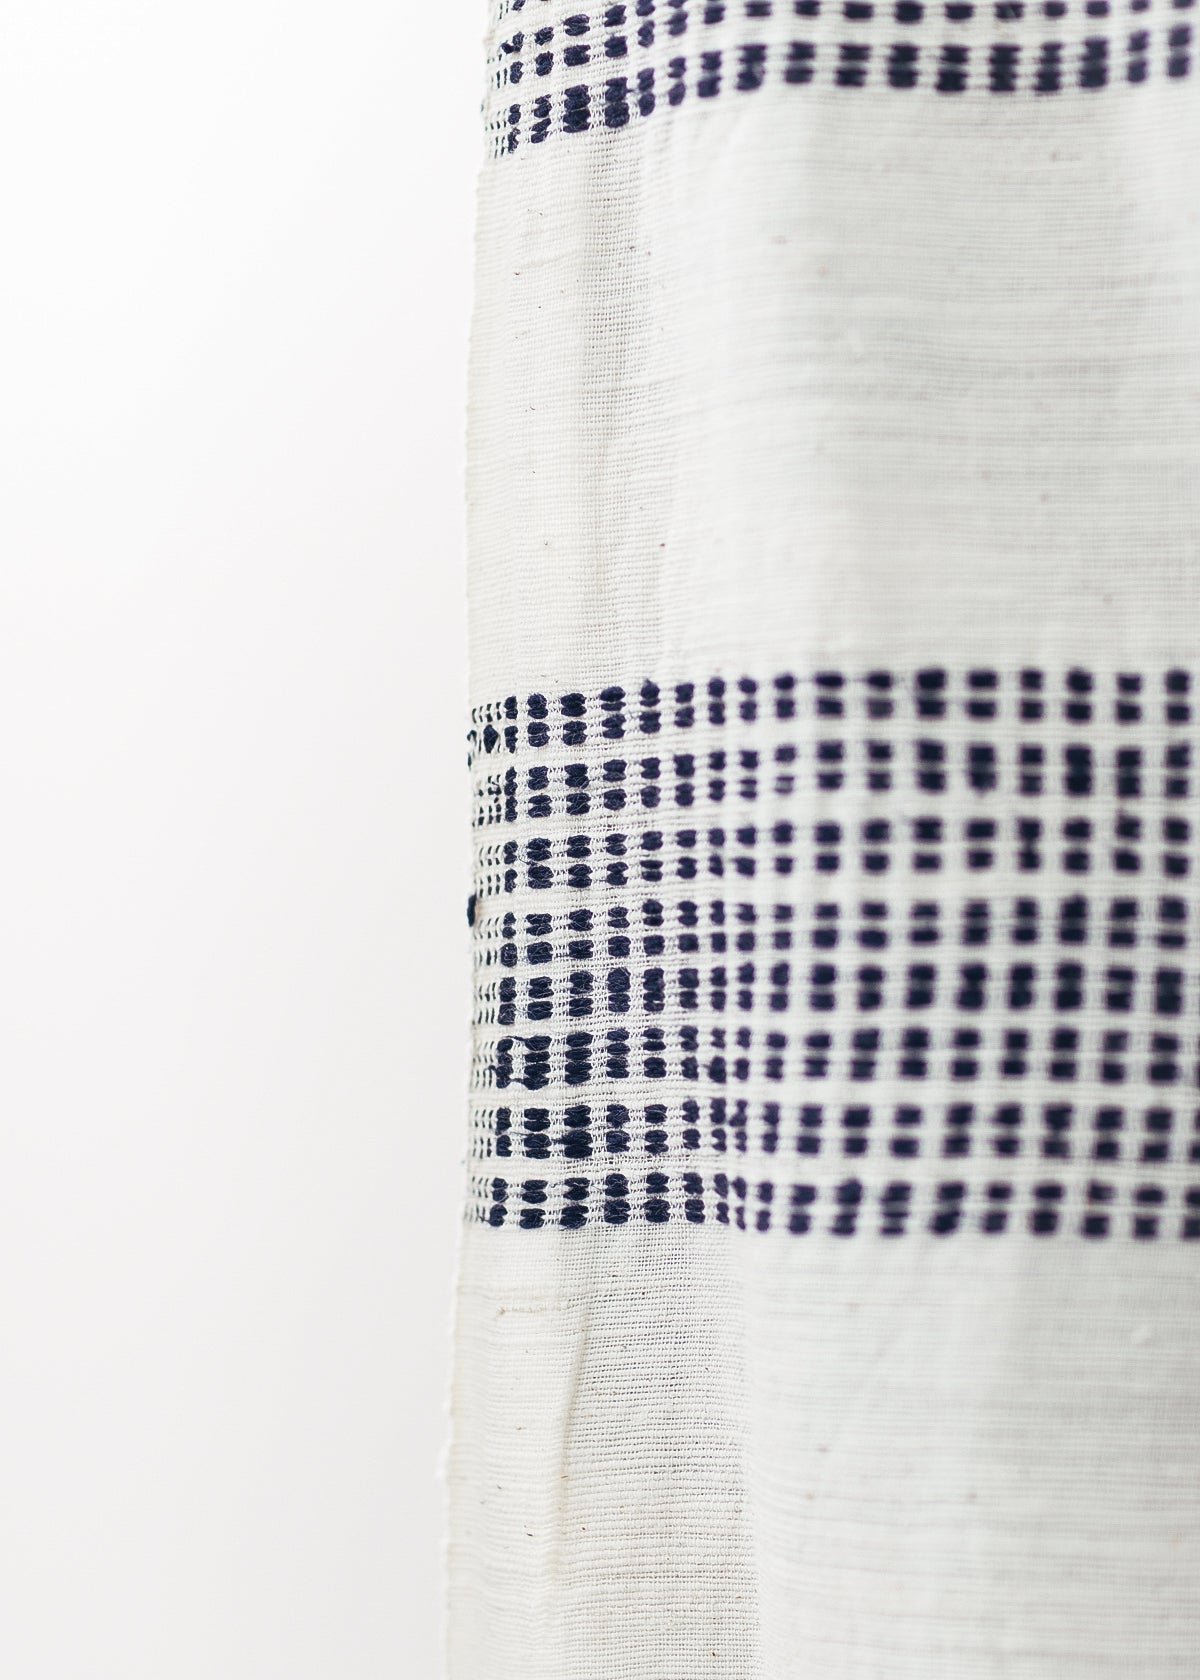 Dots Fabric Yardage - Natural with Navy by Creative Women